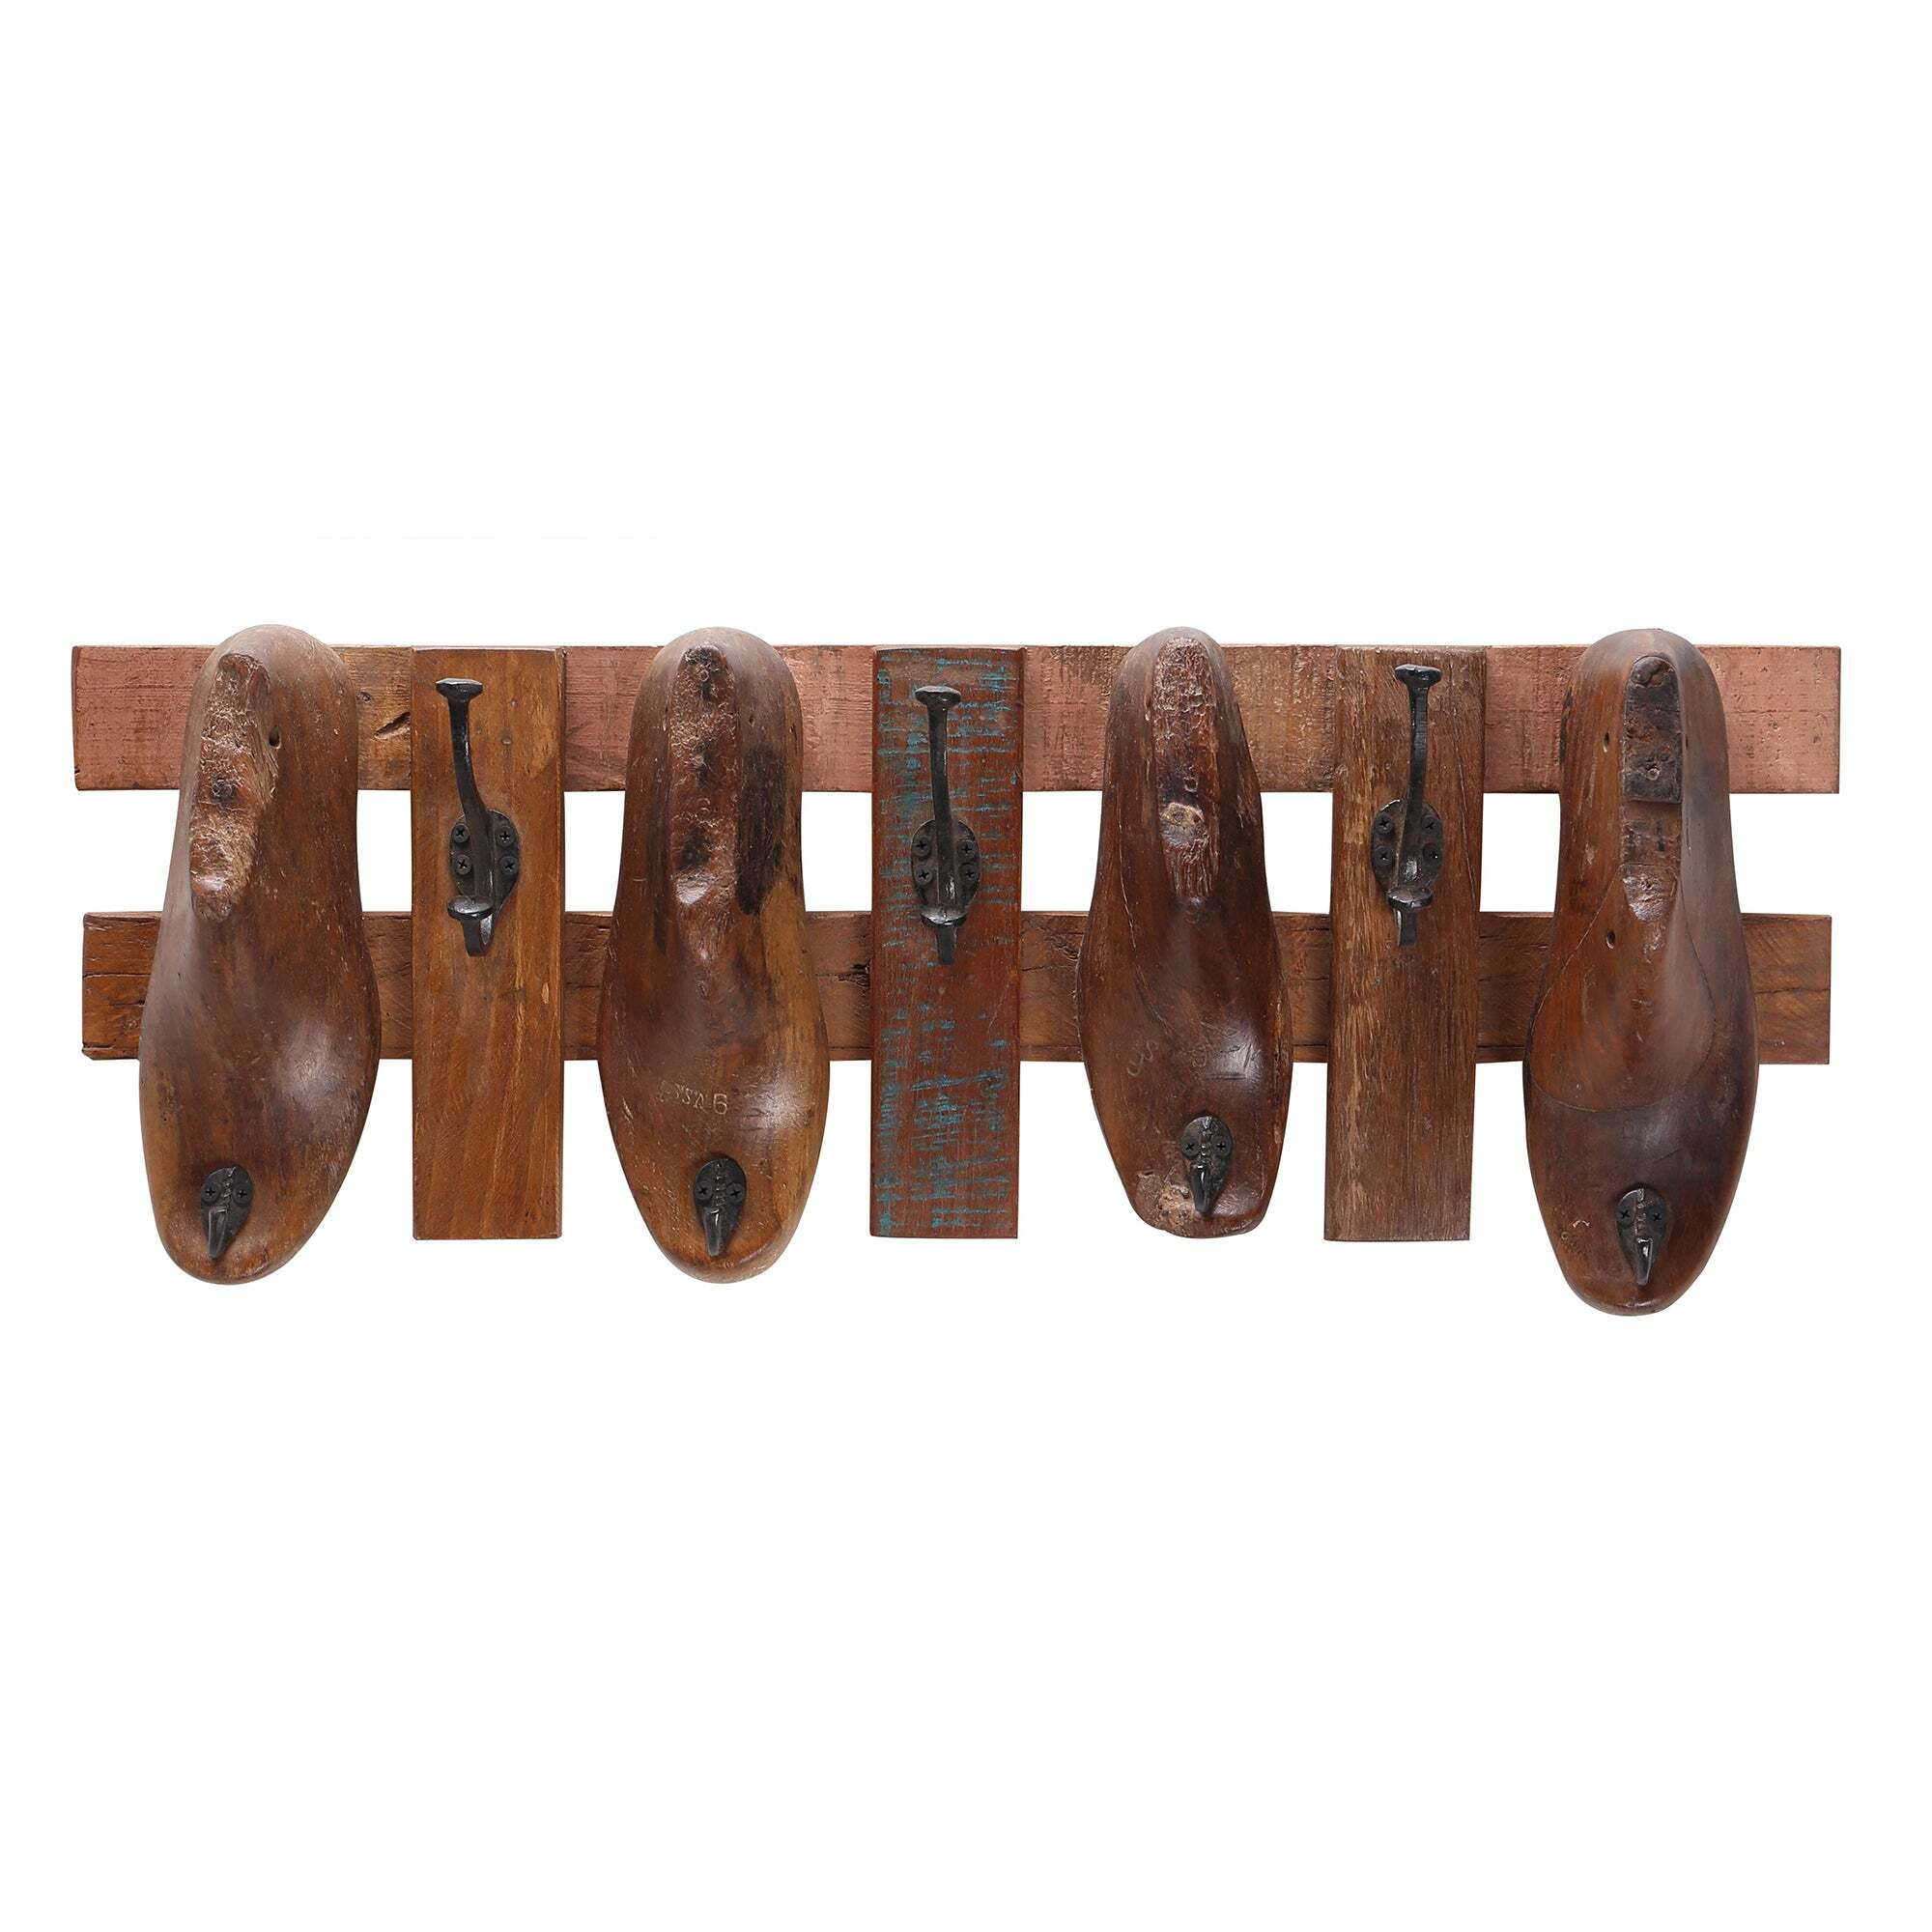 Coat Rack made from 4 Antique Shoe Moulds - image 1